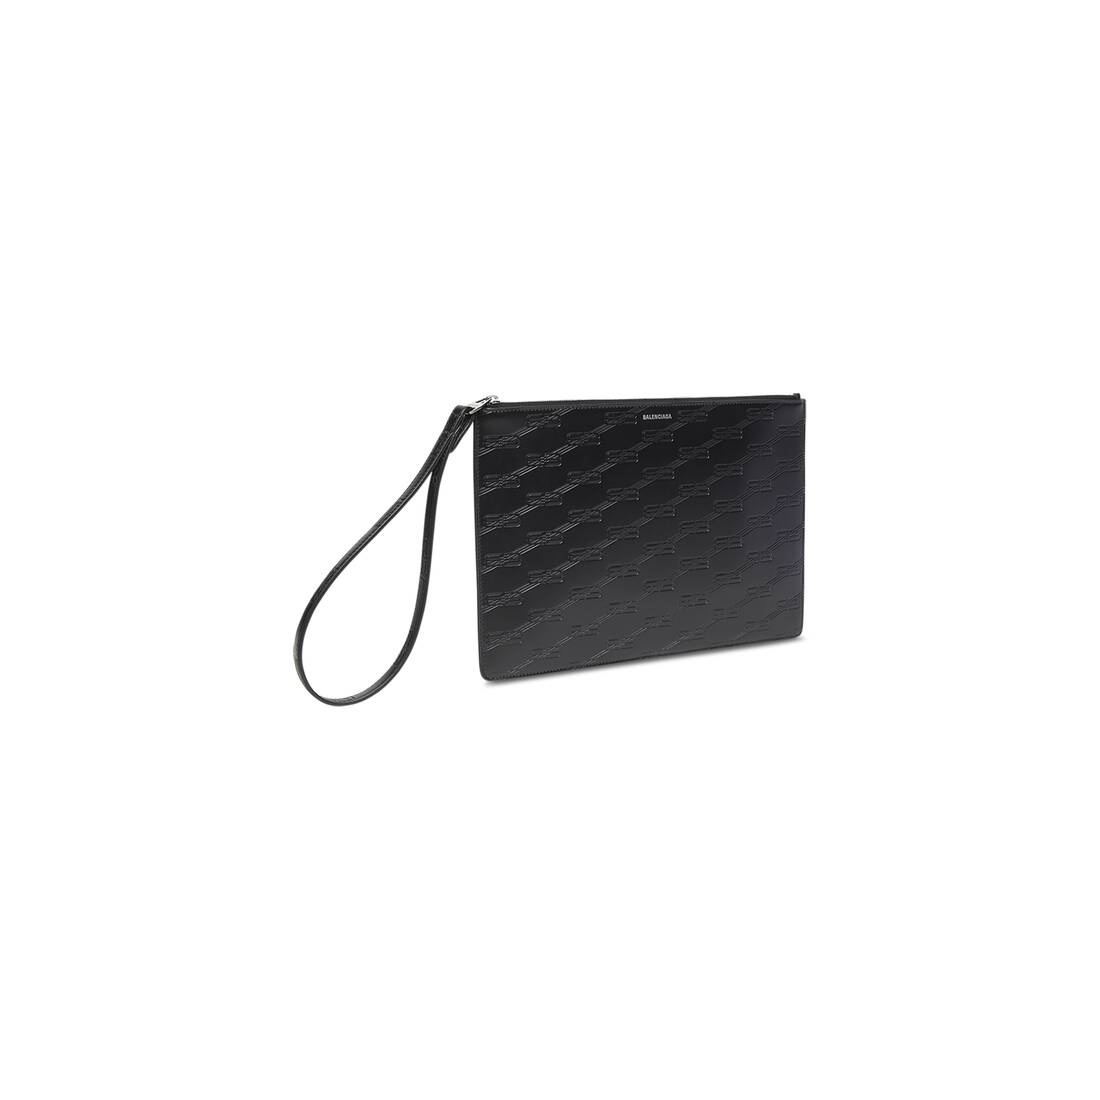 embossed monogram medium pouch with handle in box - 5